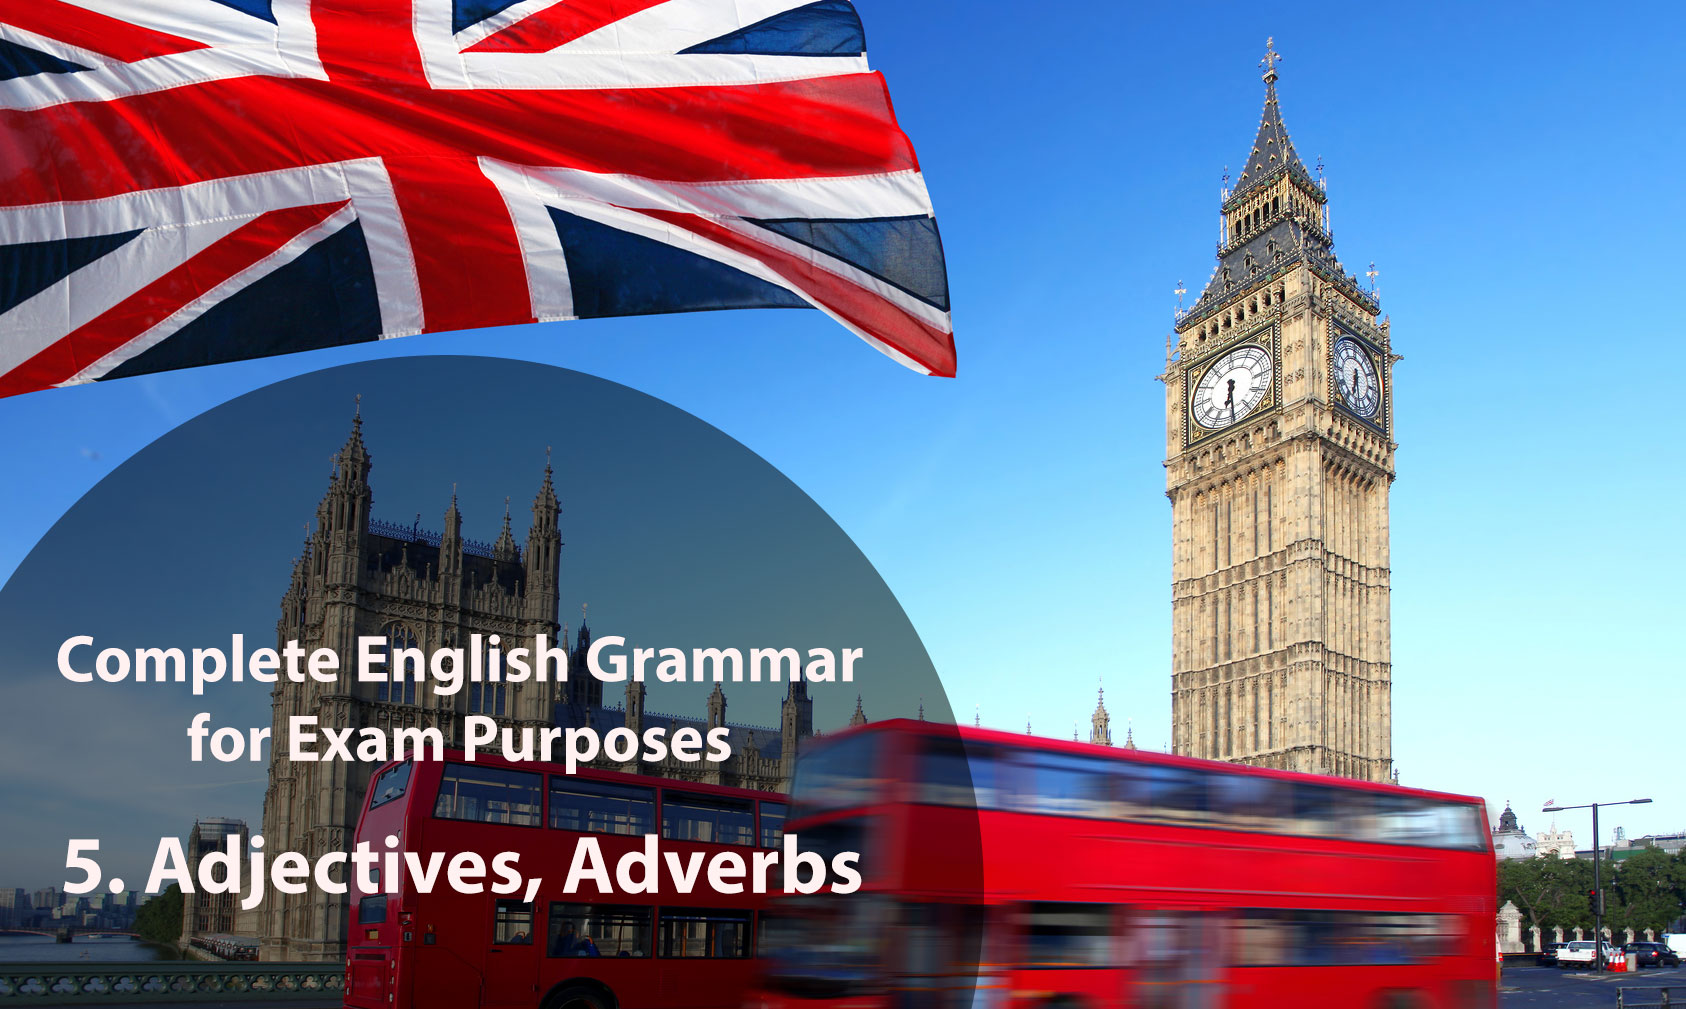 Complete English Grammar Part 5: Adjectives & Adverbs